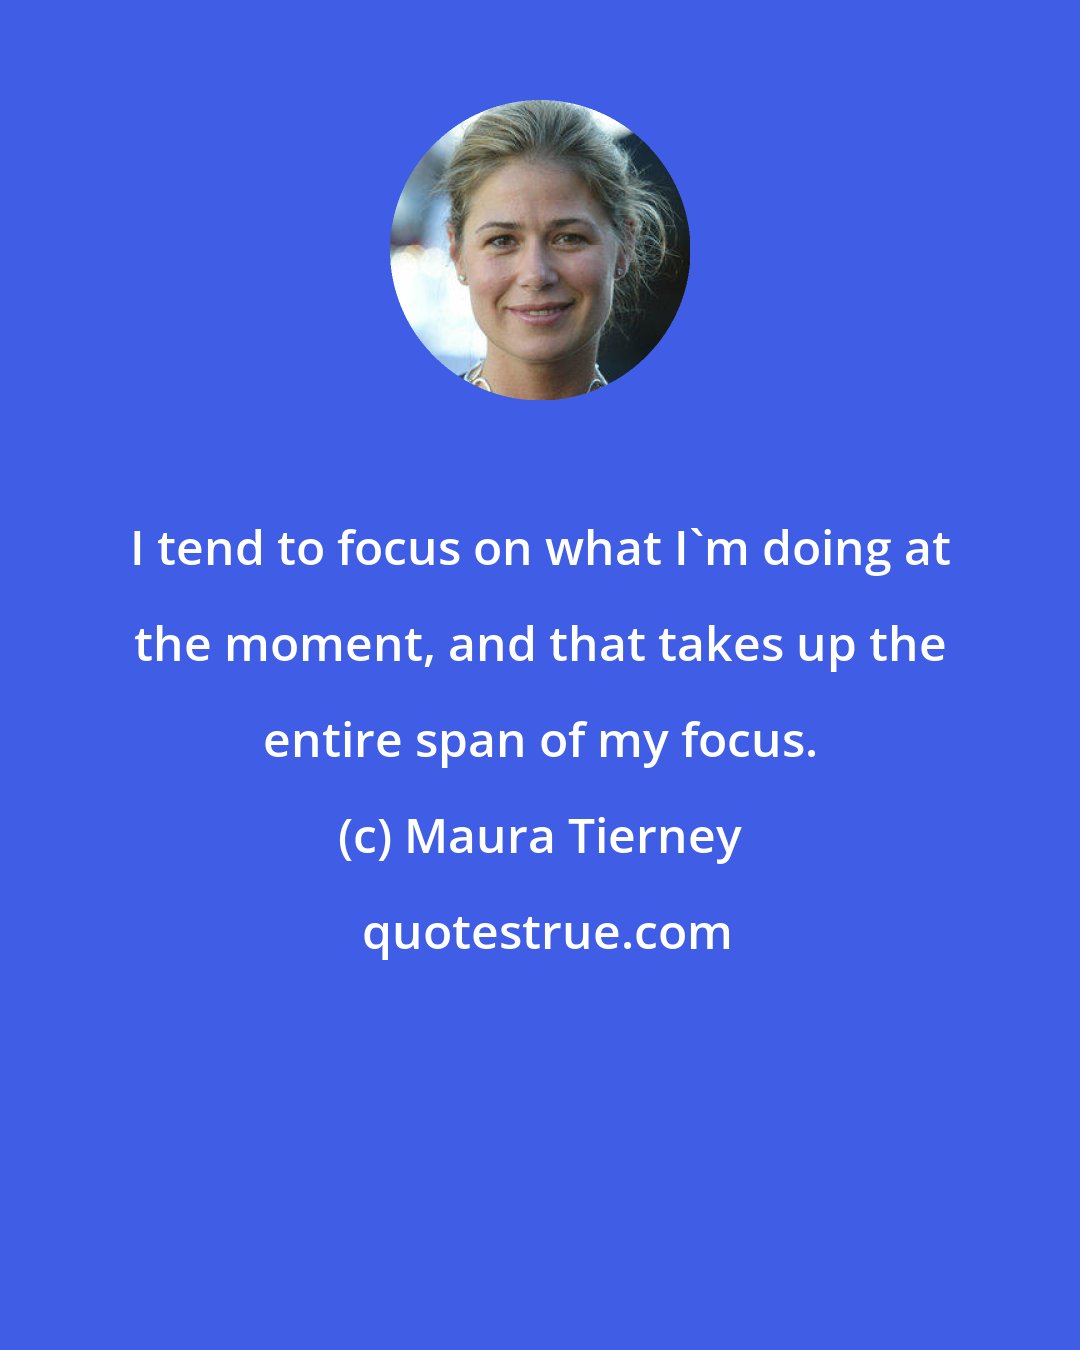 Maura Tierney: I tend to focus on what I'm doing at the moment, and that takes up the entire span of my focus.